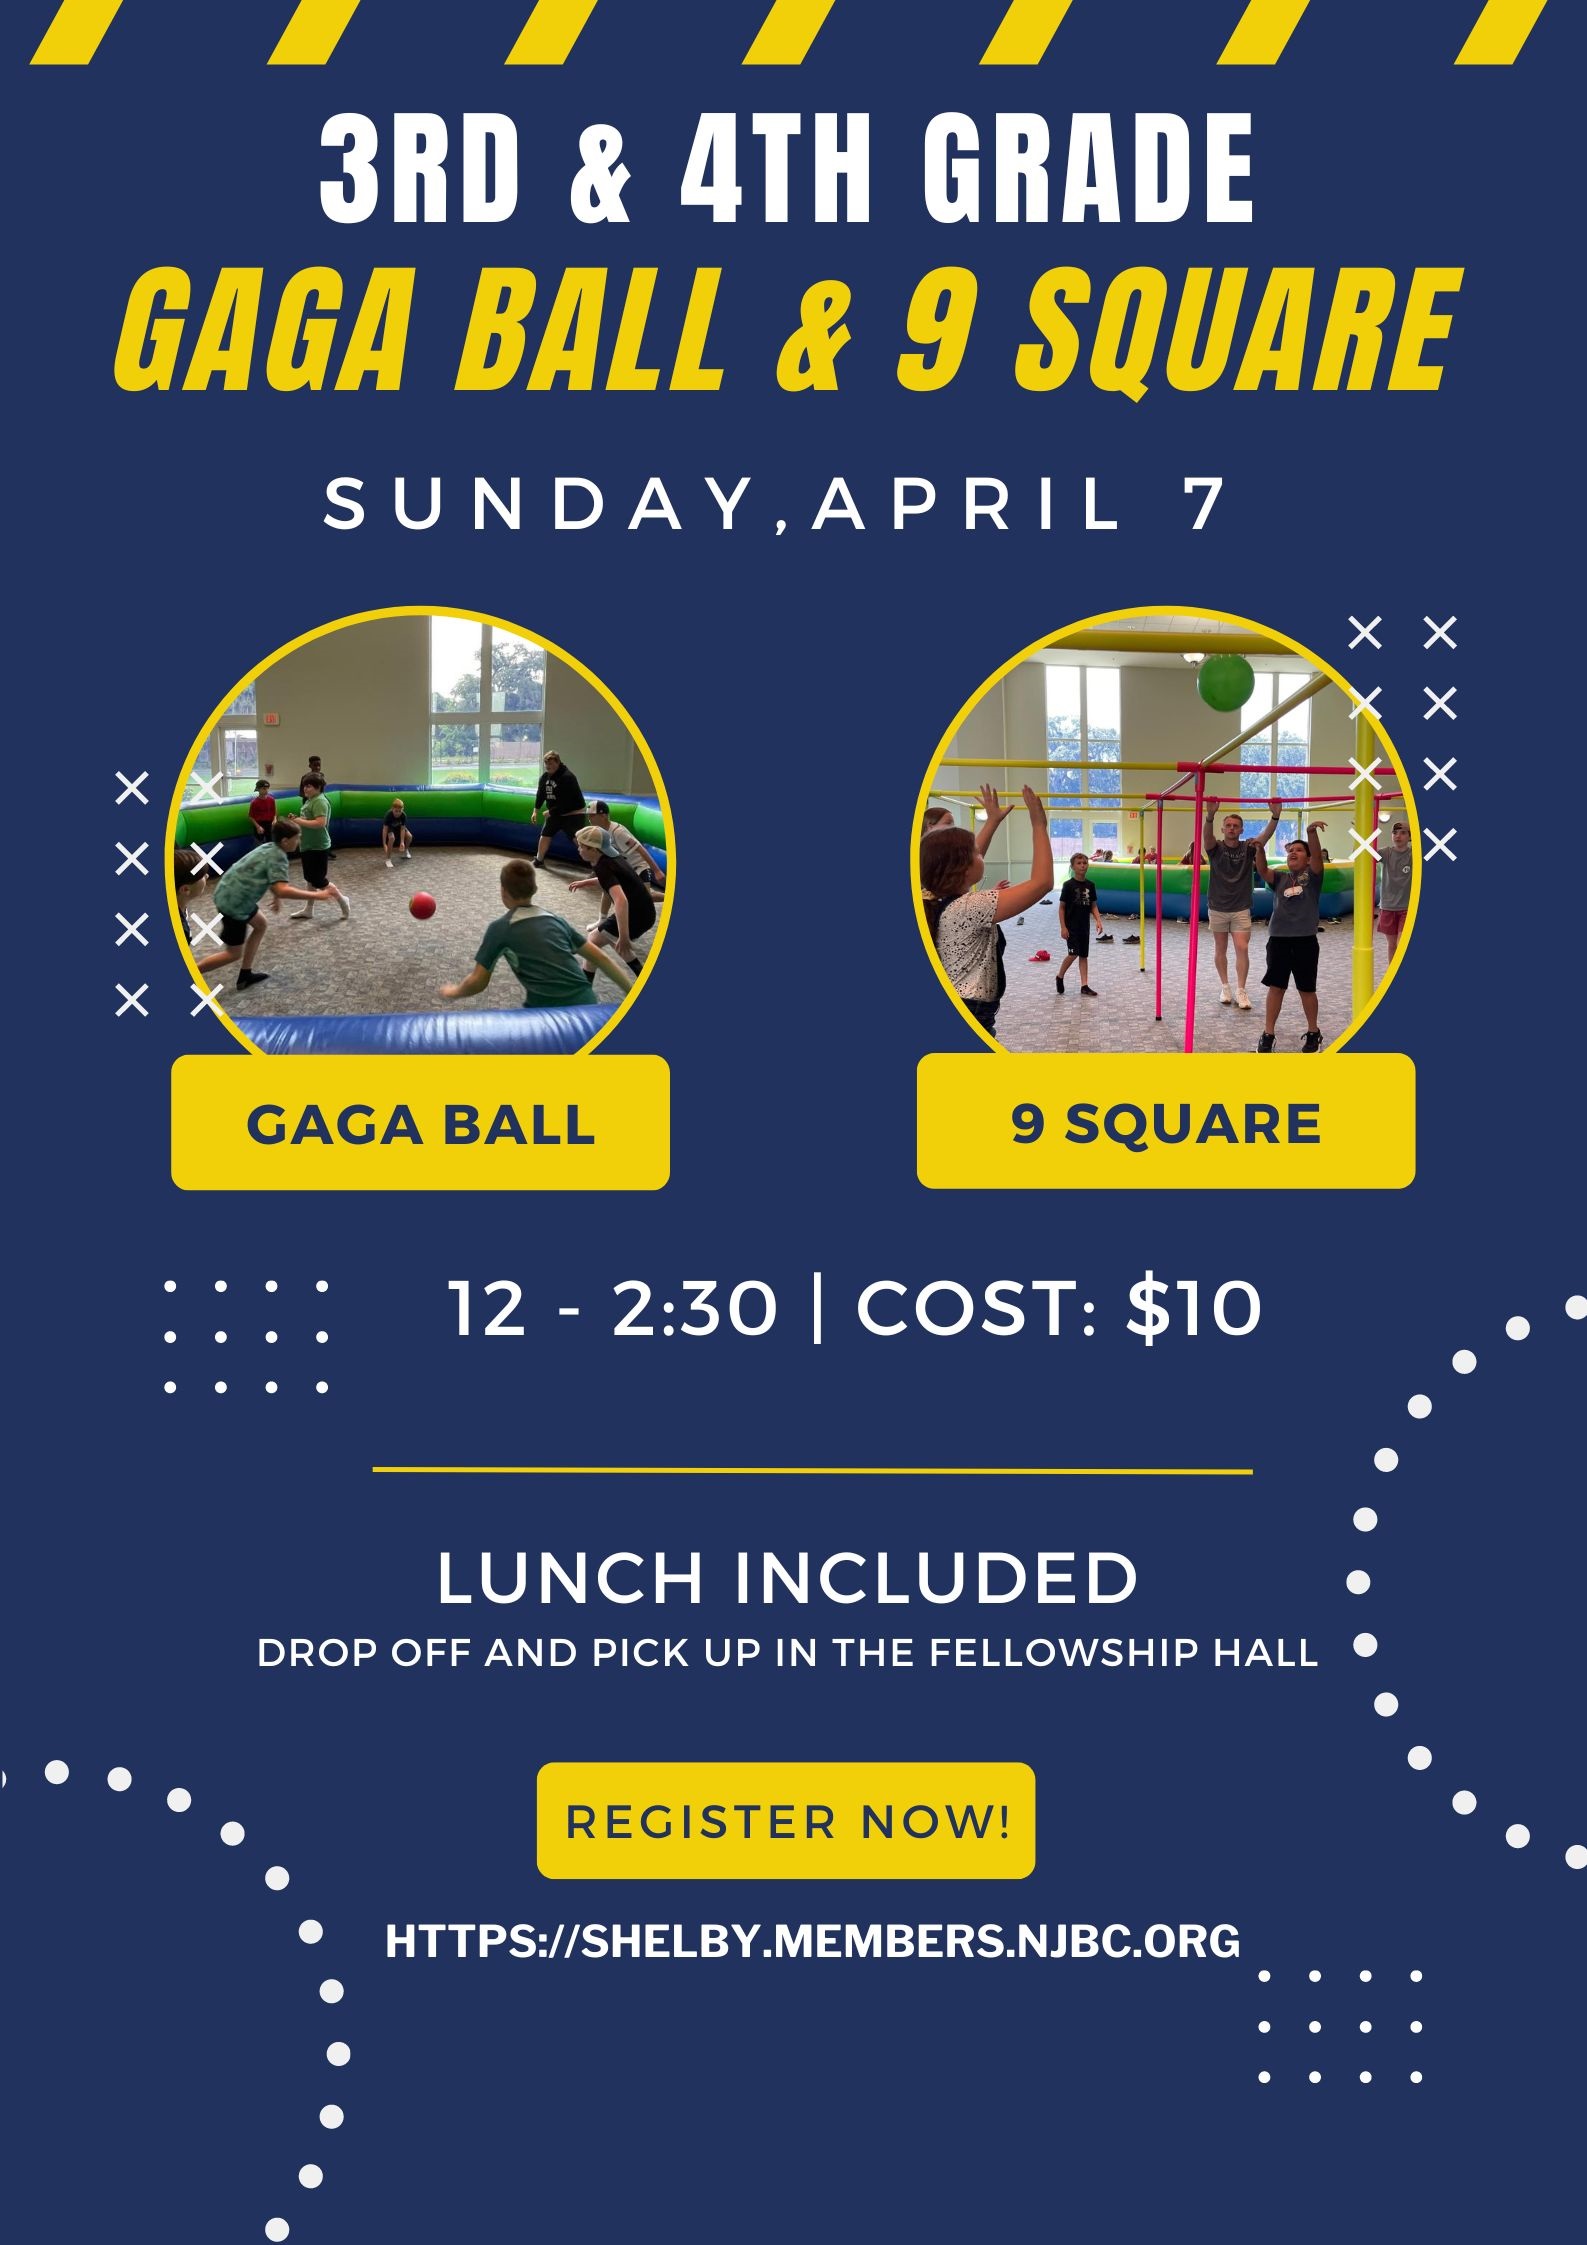 3rd and 4th Grade Gaga Ball 9 Square and Lunch April 7